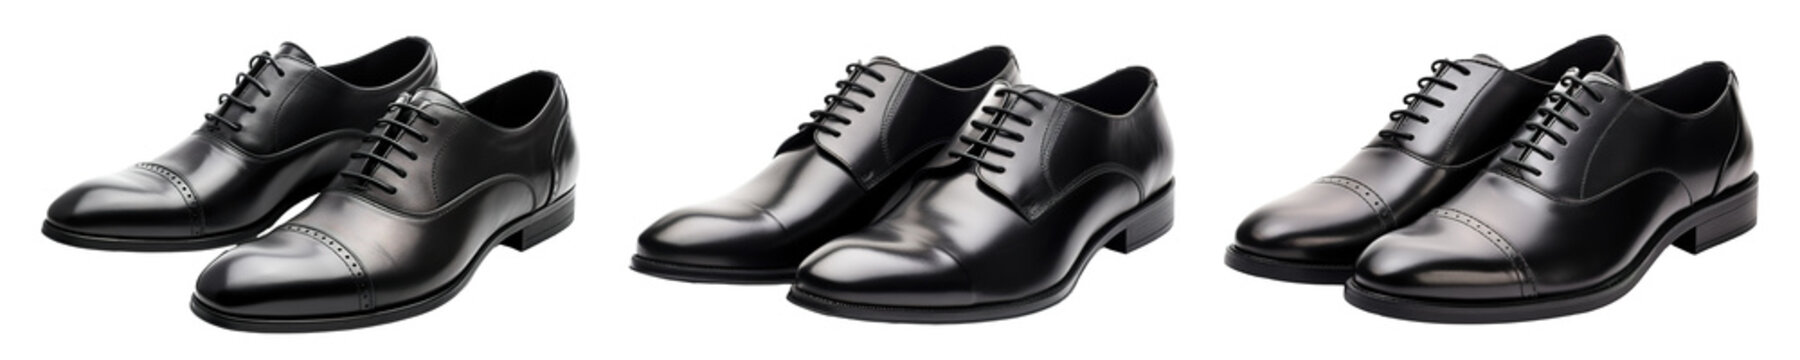 Black leather shoes on a Transparent background